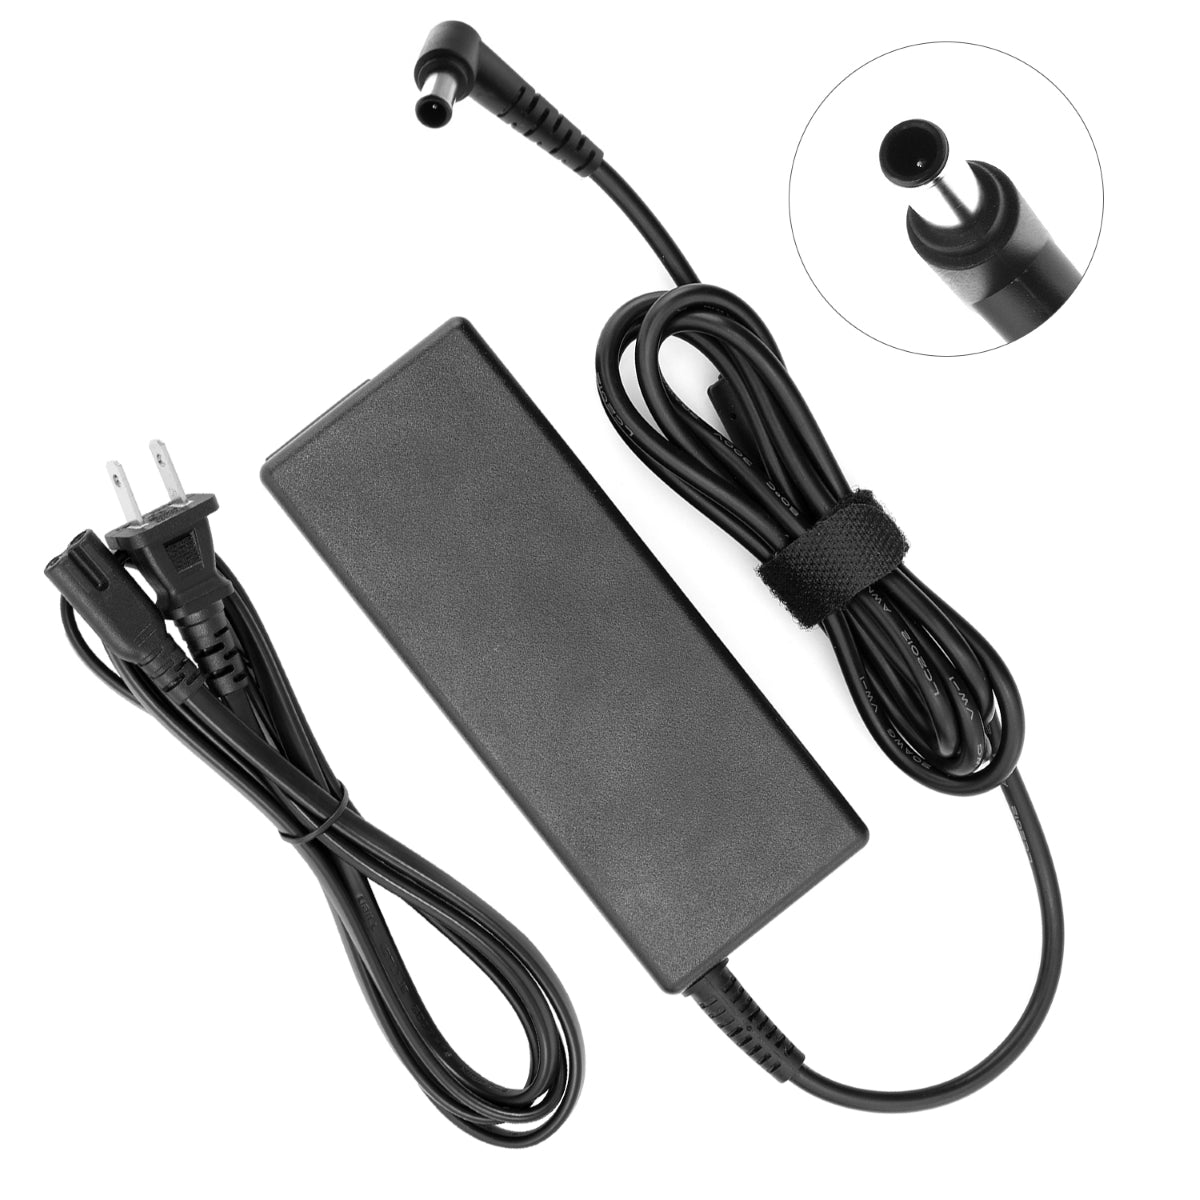 Power Adapter for LG 27GN600-B Monitor TV